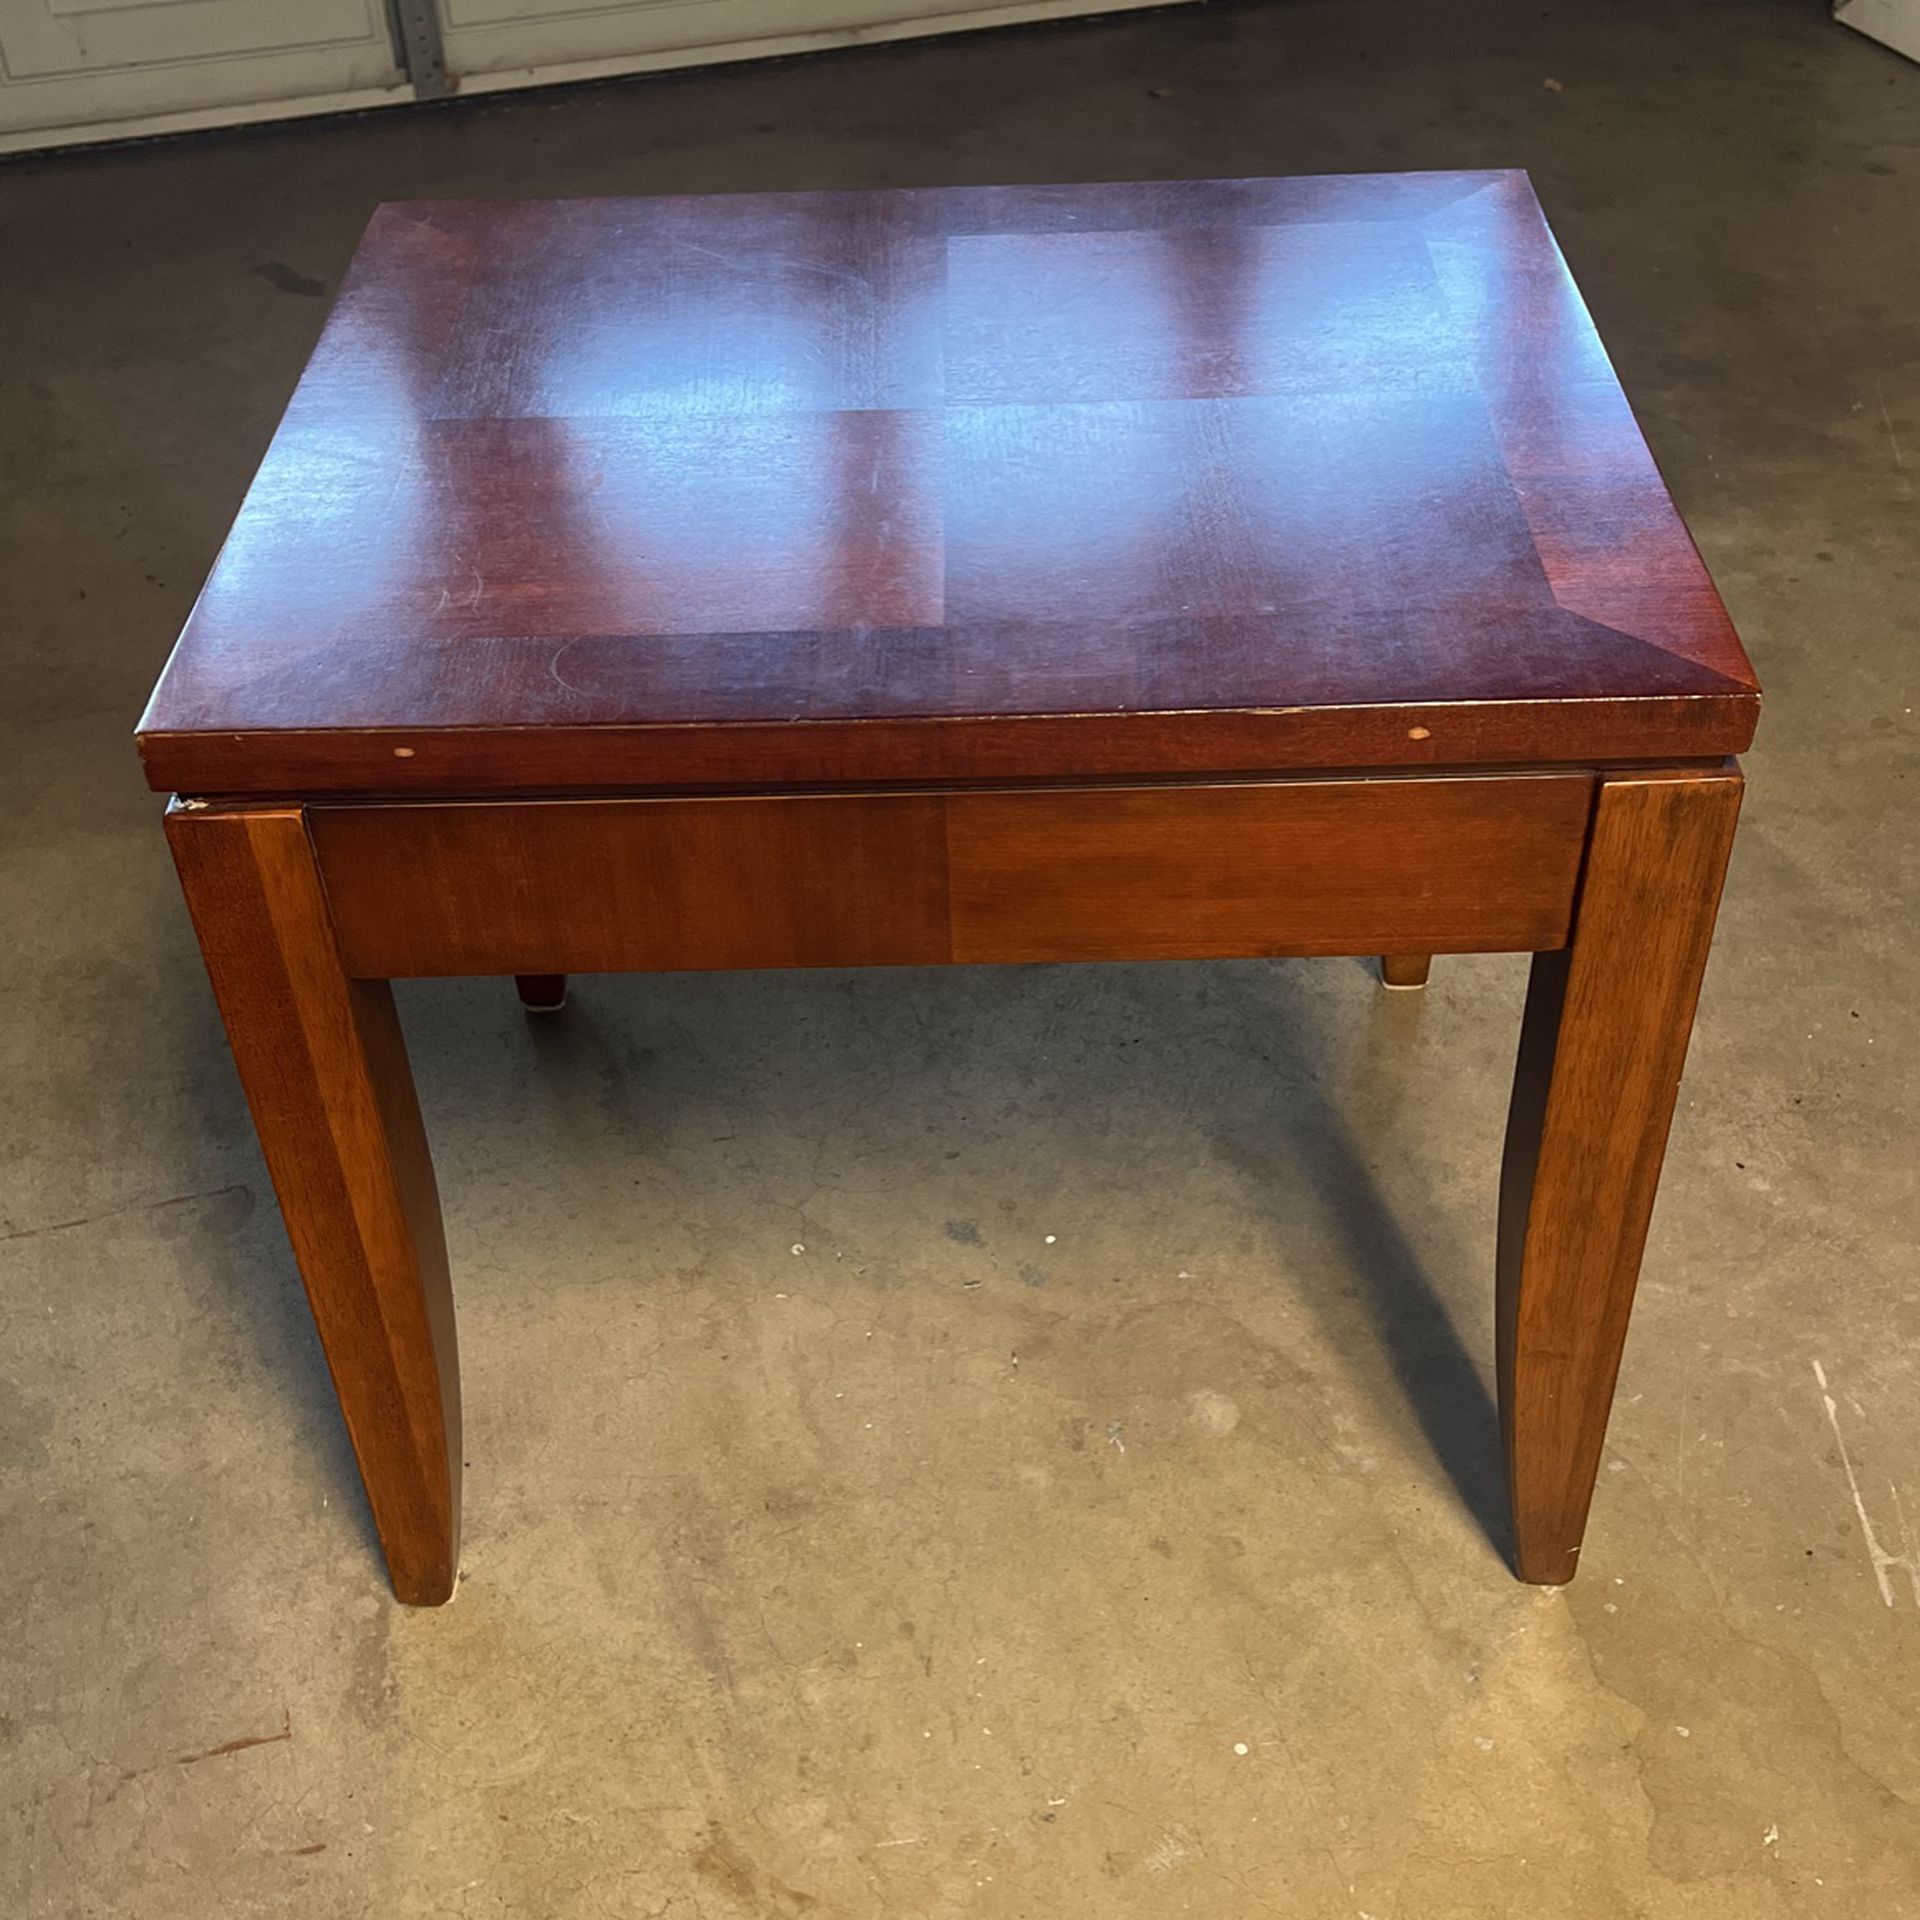 Beautiful End Table  Paid 100 For It  Selling For 10 Bucks 